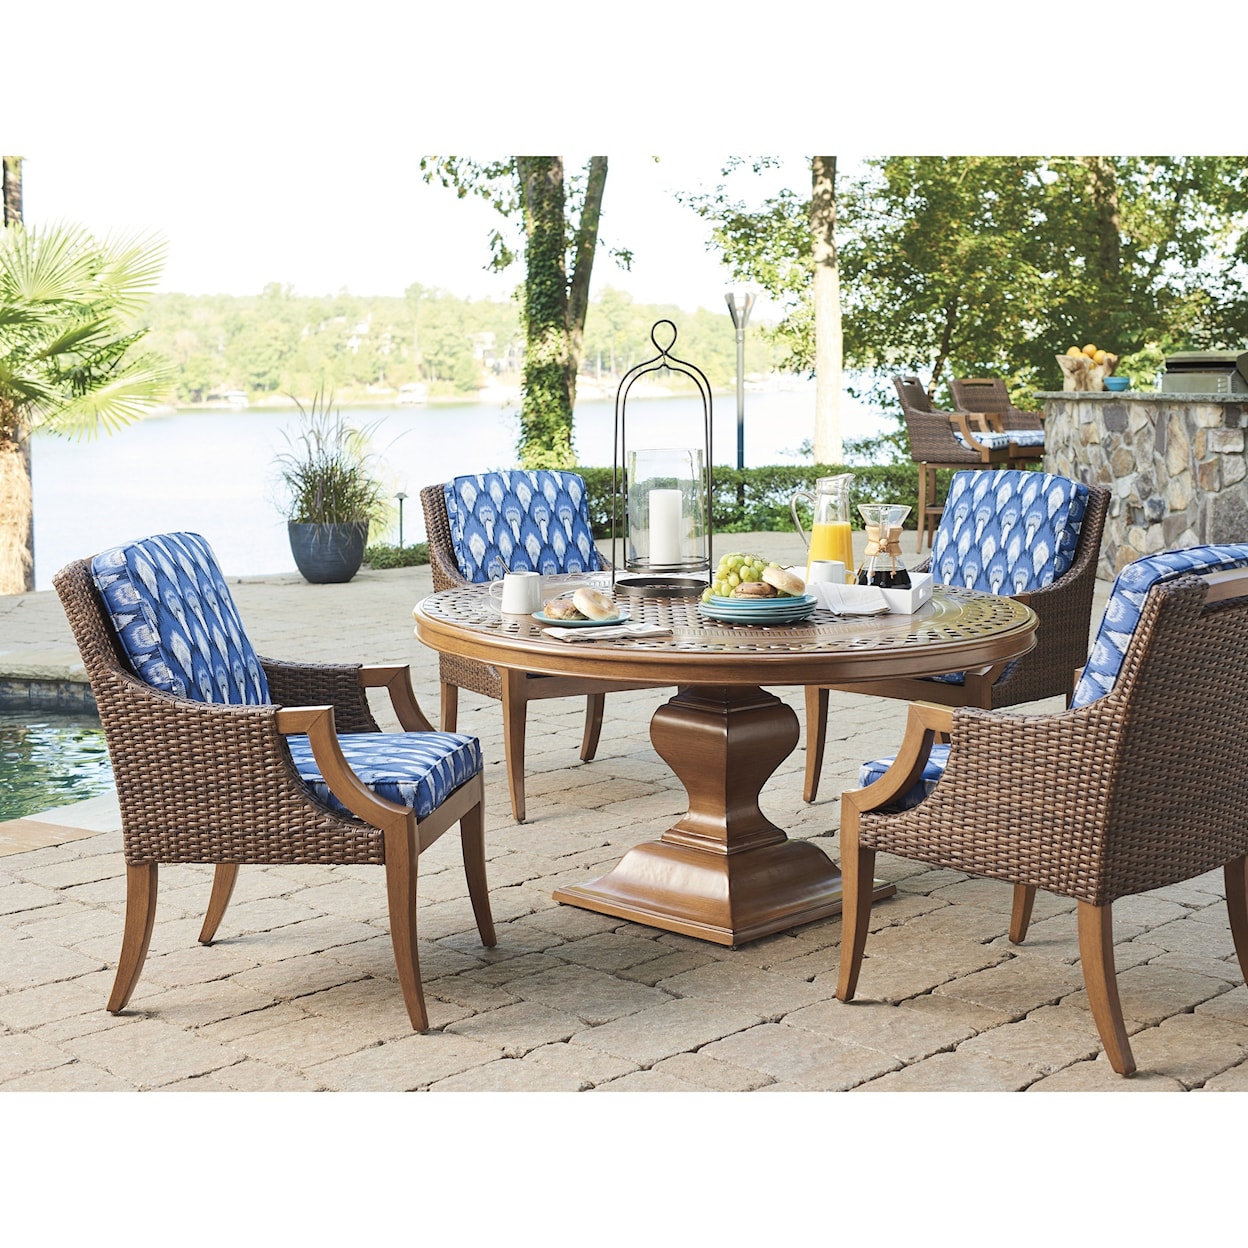 Tommy Bahama Outdoor Living Harbor Isle Round Dining Table